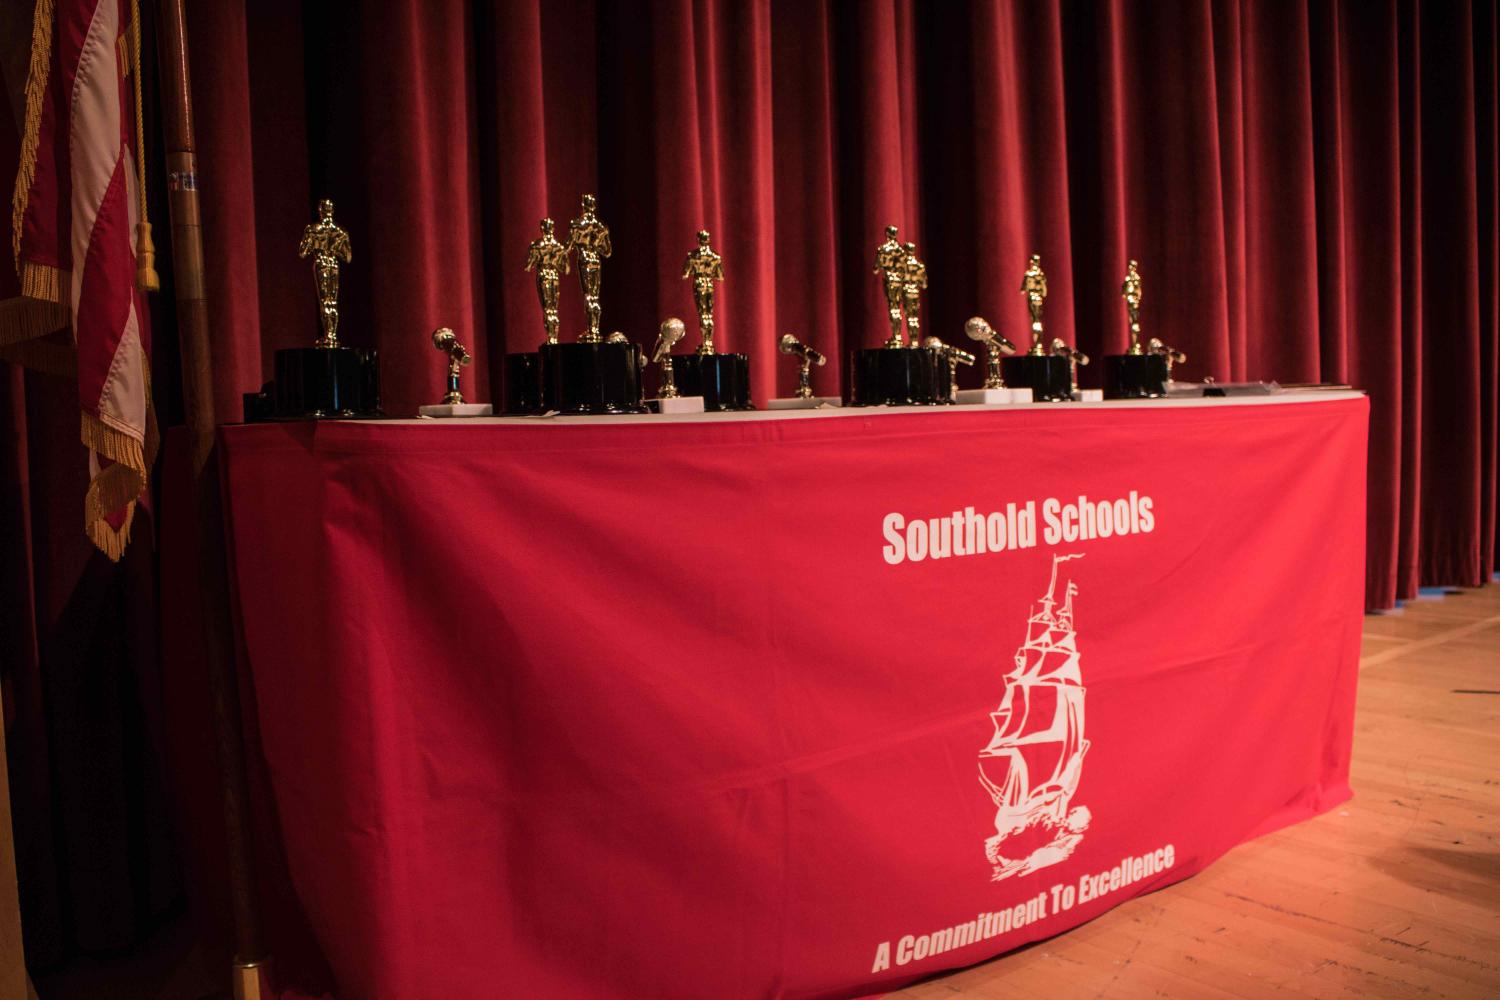 Southold Schools hosted the First Annual BASH (Broadcast Awards for Senior High) event on Monday, June 5, 2017.